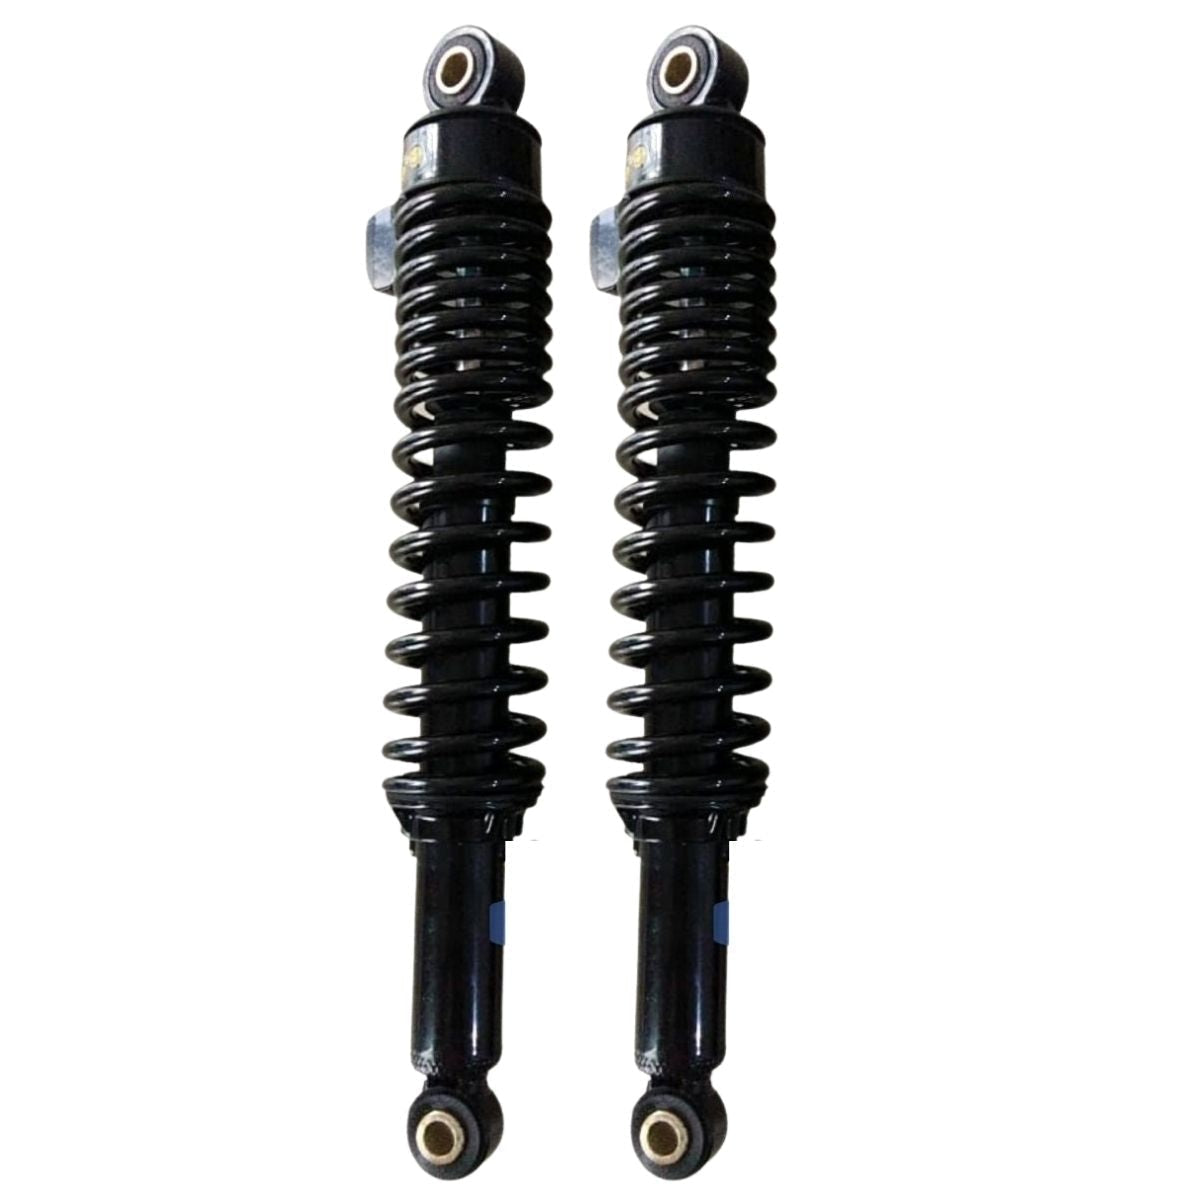 http://eauto.co.in/cdn/shop/products/rear-shock-absorber-for-tvs-star-city-110-set-of-2-622.jpg?v=1645881285